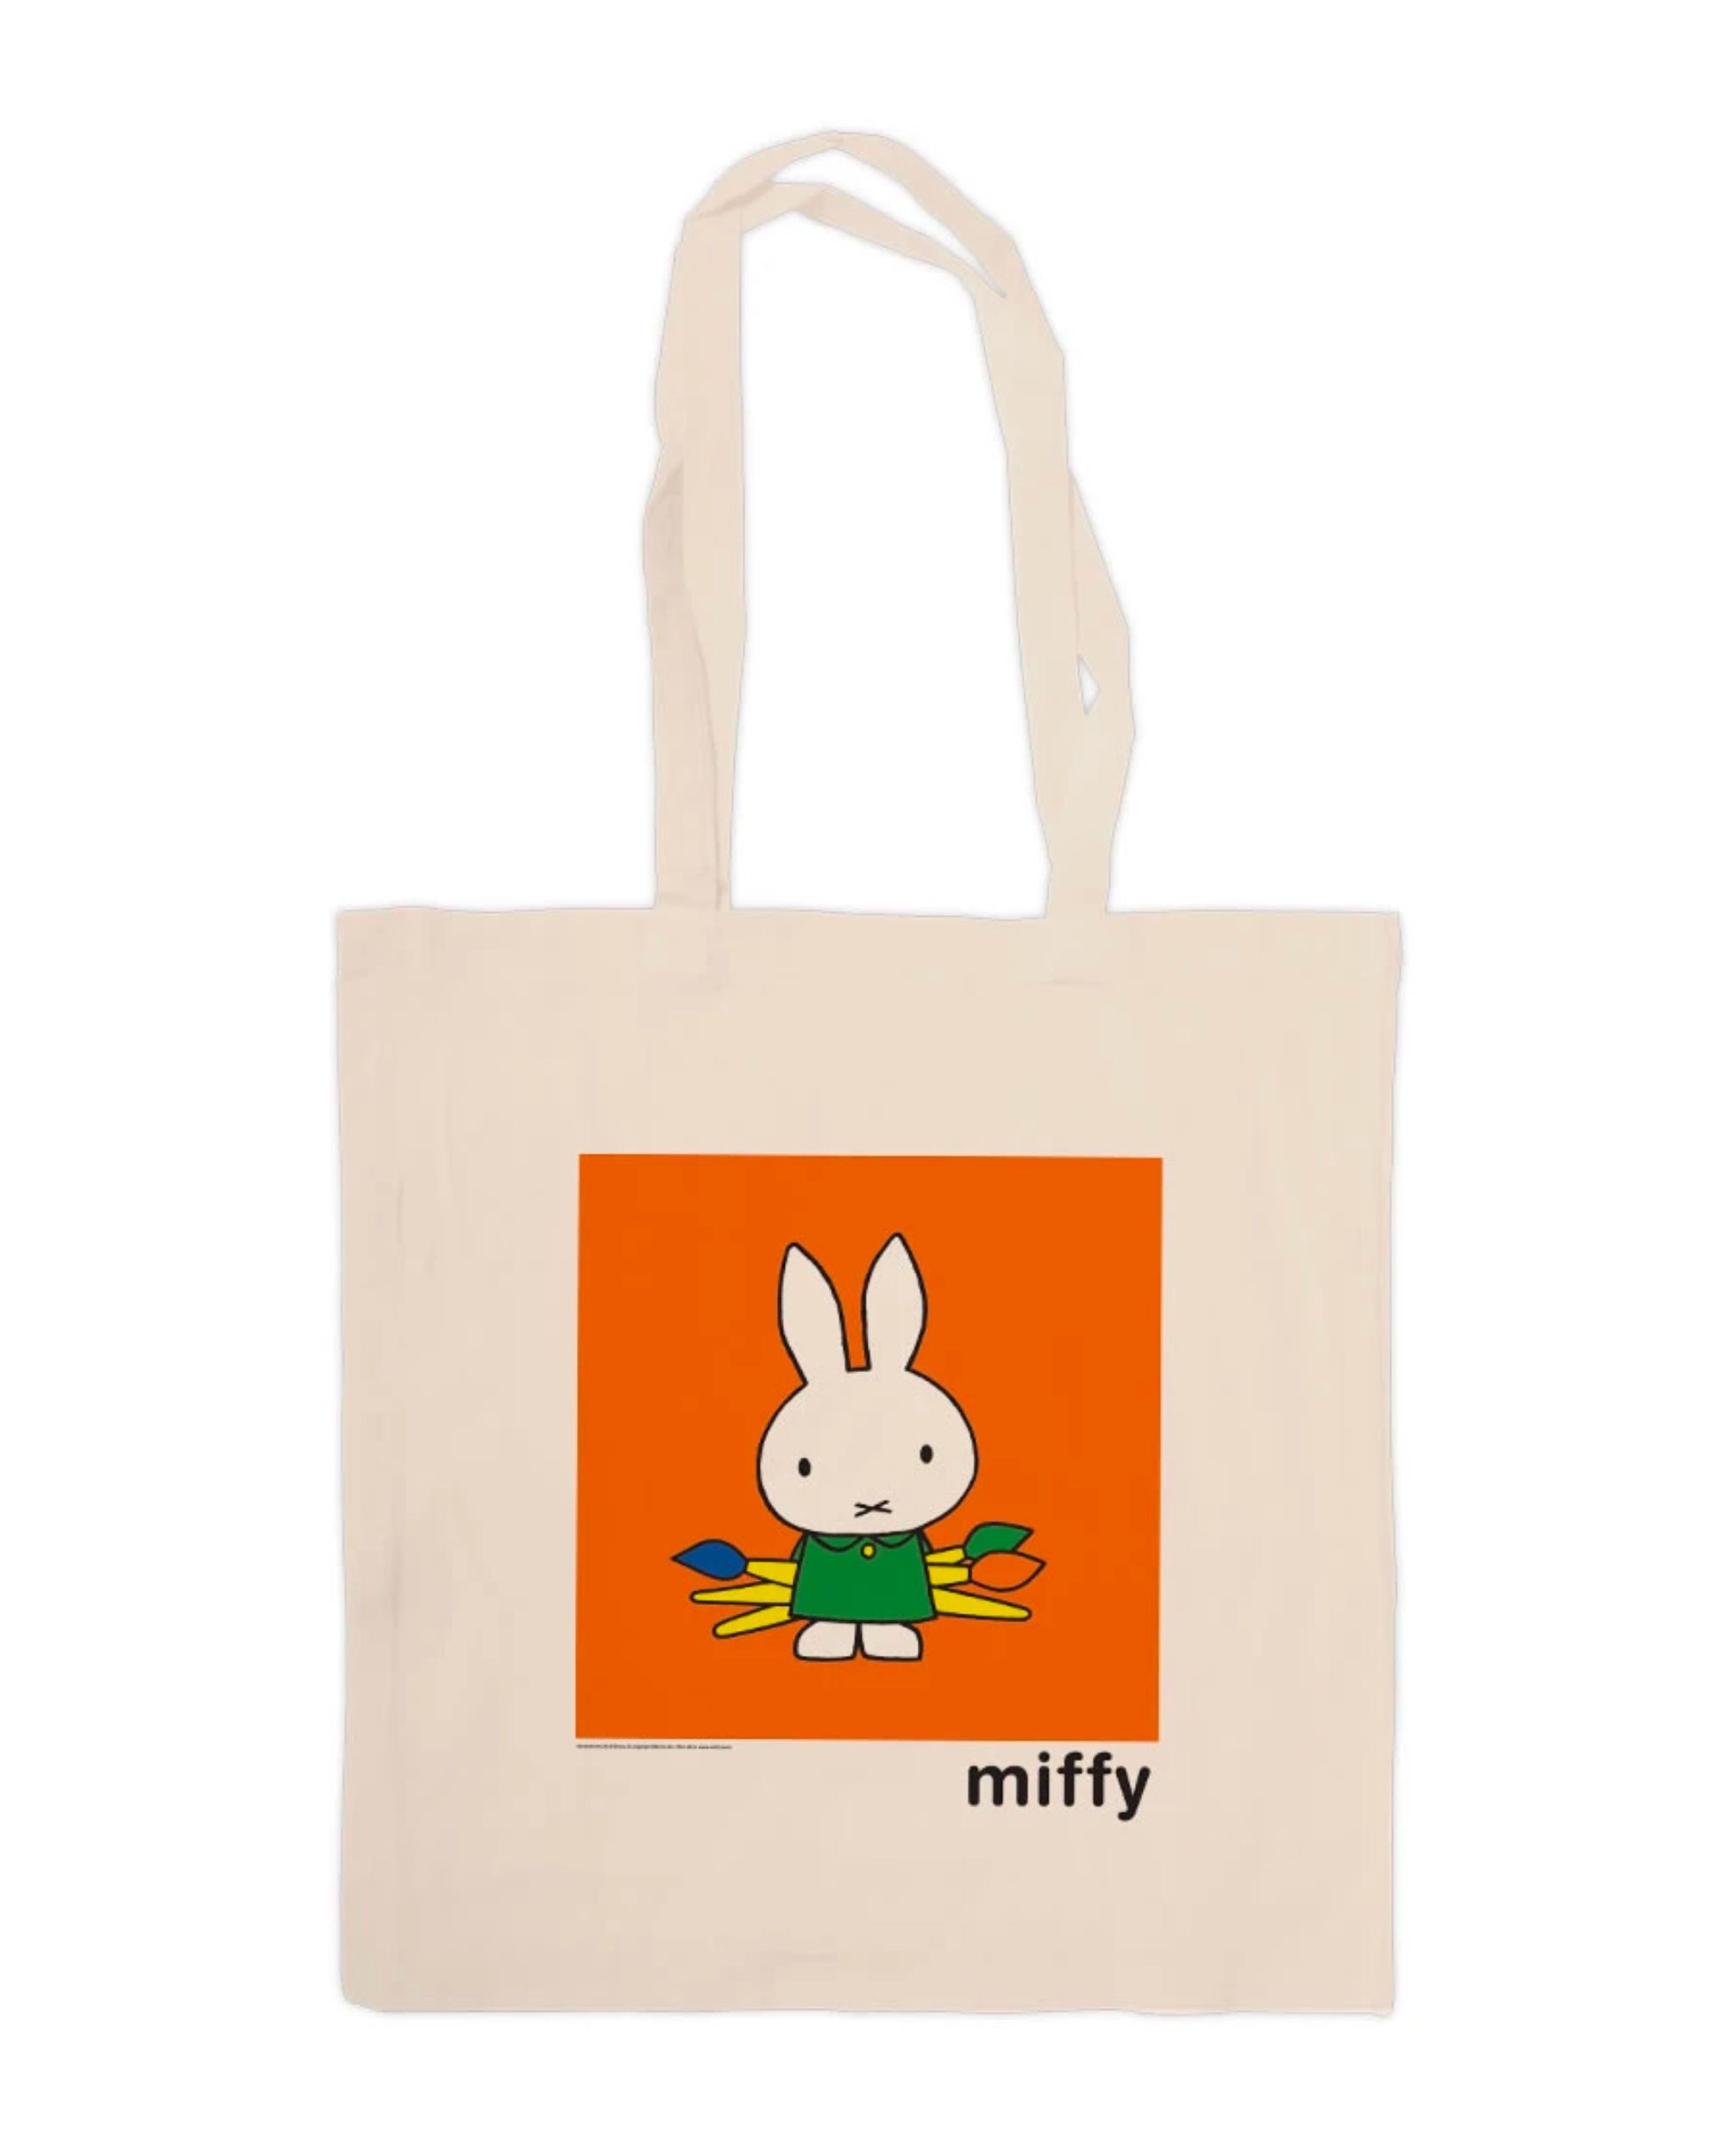 Star Edition Miffy canvas tote bag, miffy holding paintbrushes